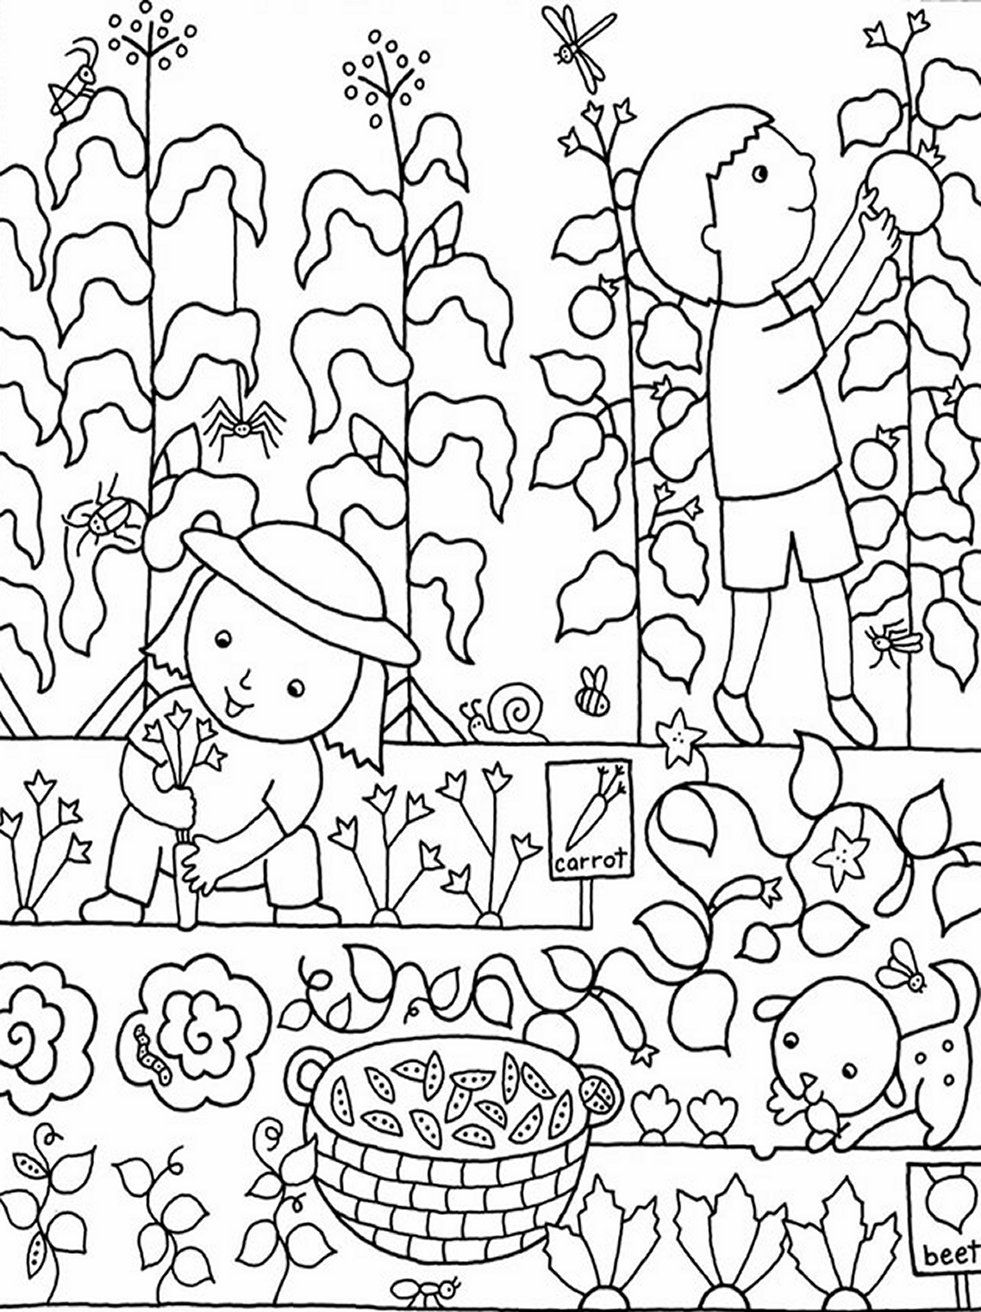 Kids Gardening Coloring Pages Free Colouring Pictures to